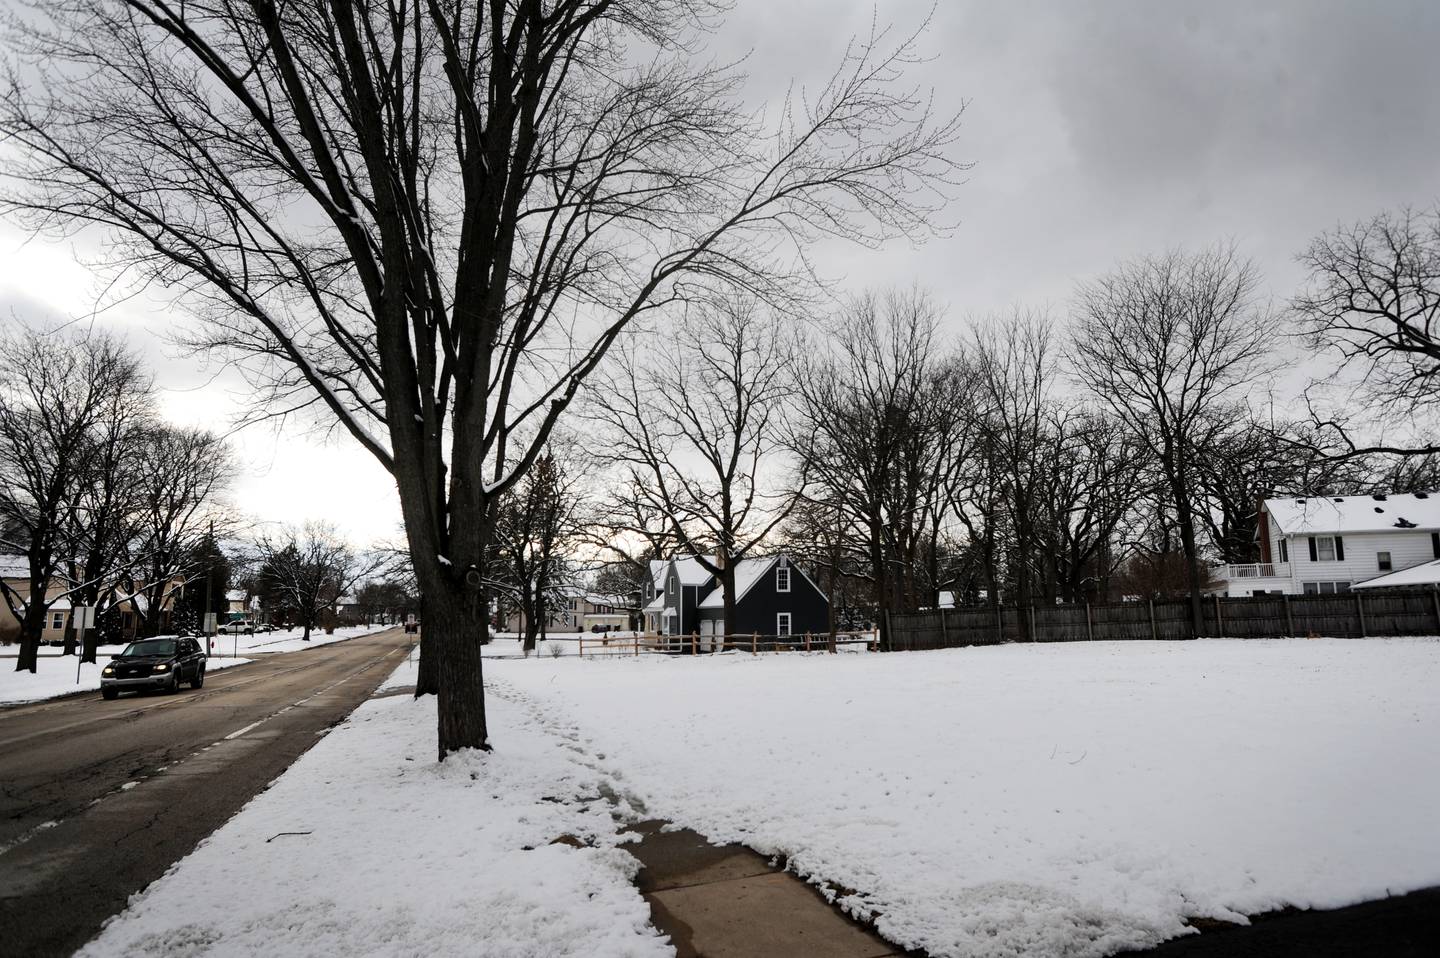 The empty lot at 94 Dole Ave. in Crystal Lake on Monday, March 7, 2022. AJ Freund, a 5-year-old child who was abused by his parents, Andrew Freund Sr. and JoAnn Cunningham, and eventually murdered on April 15, 2019, once lived in the house at this location. The house was demolished on March 4, 2020.